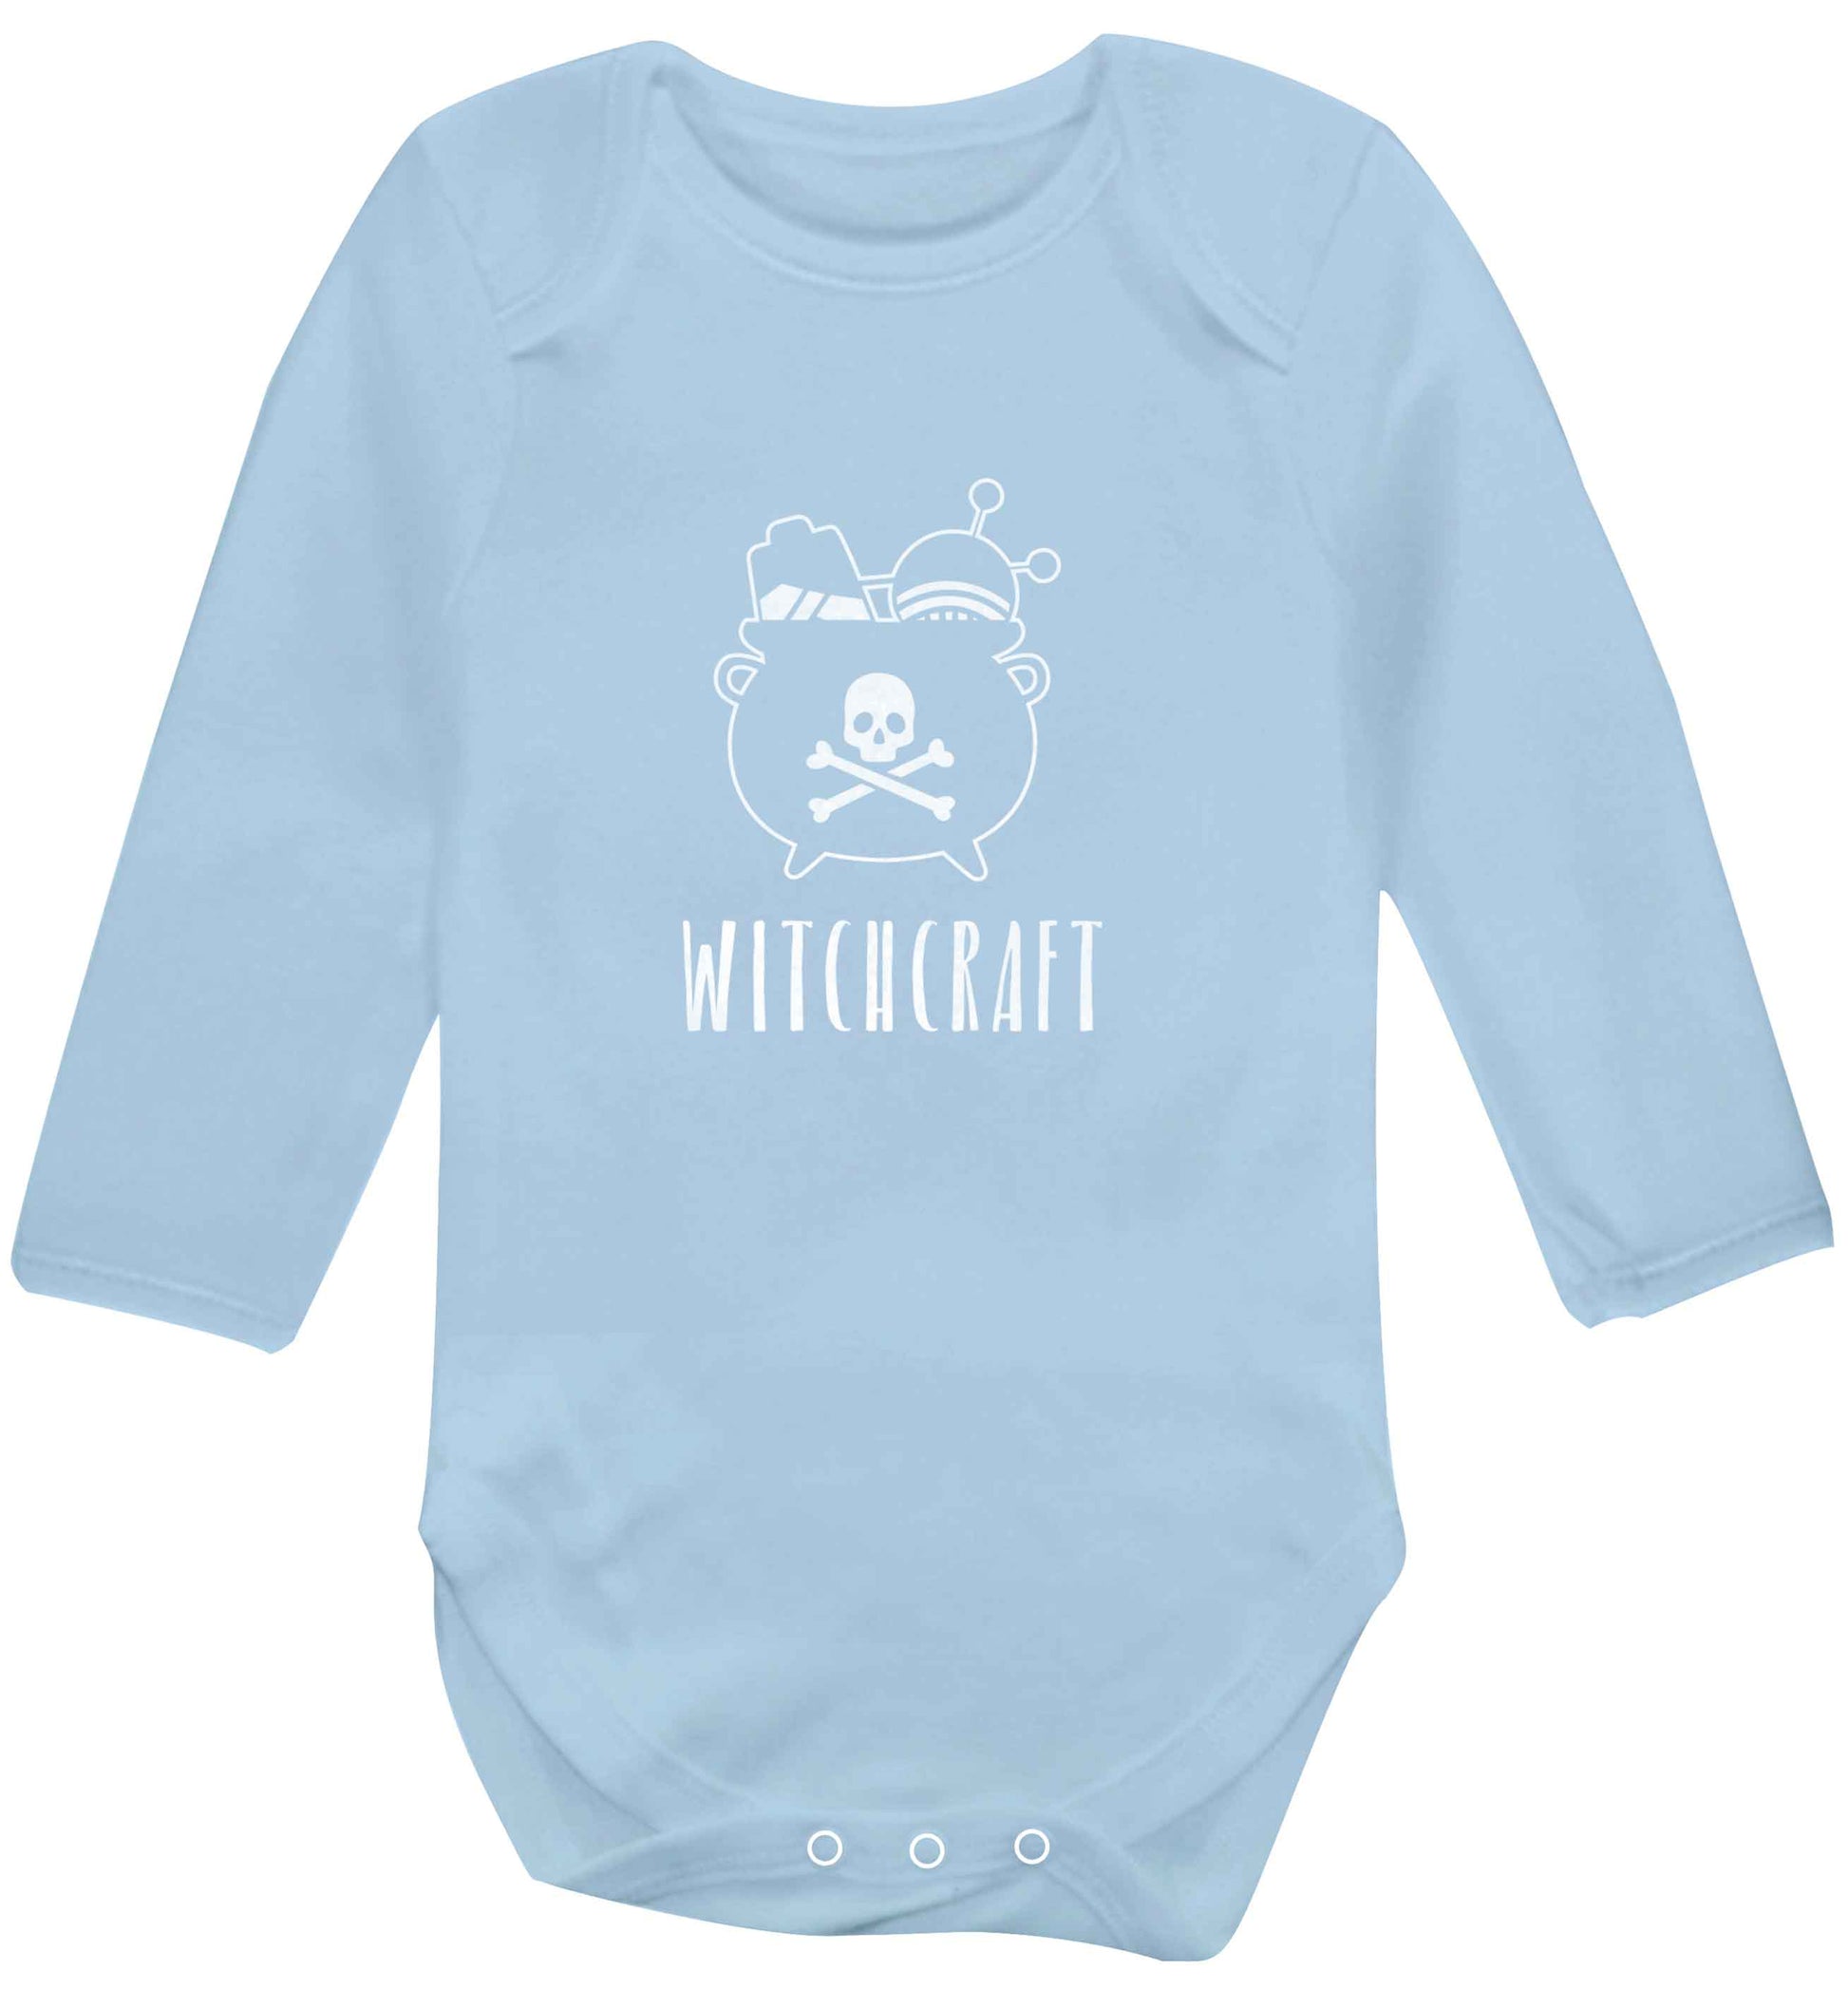 Witchcraft baby vest long sleeved pale blue 6-12 months